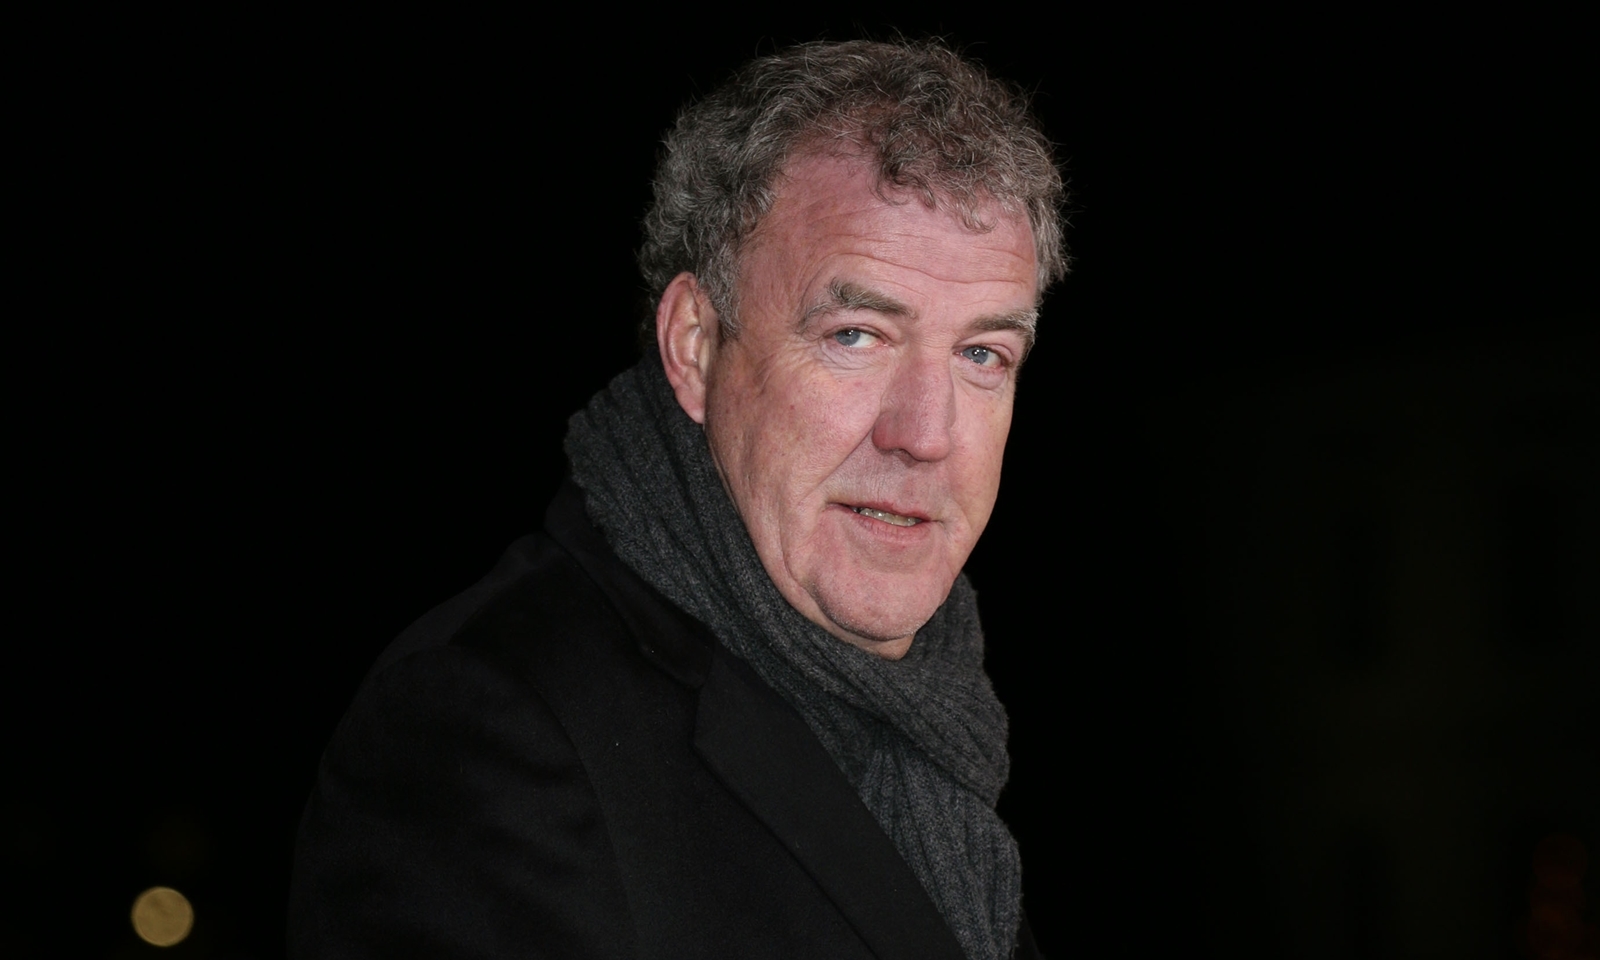 10/12/2014 PA File Photo of Jeremy Clarkson at A Night of Heroes: The Sun Military Awards at the National Maritime Museum, London. See PA Feature XMAS Year Quotes. Picture credit should read: Yui Mok/PA Photos. WARNING: This picture must only be used to accompany PA Feature XMAS Year Quotes.